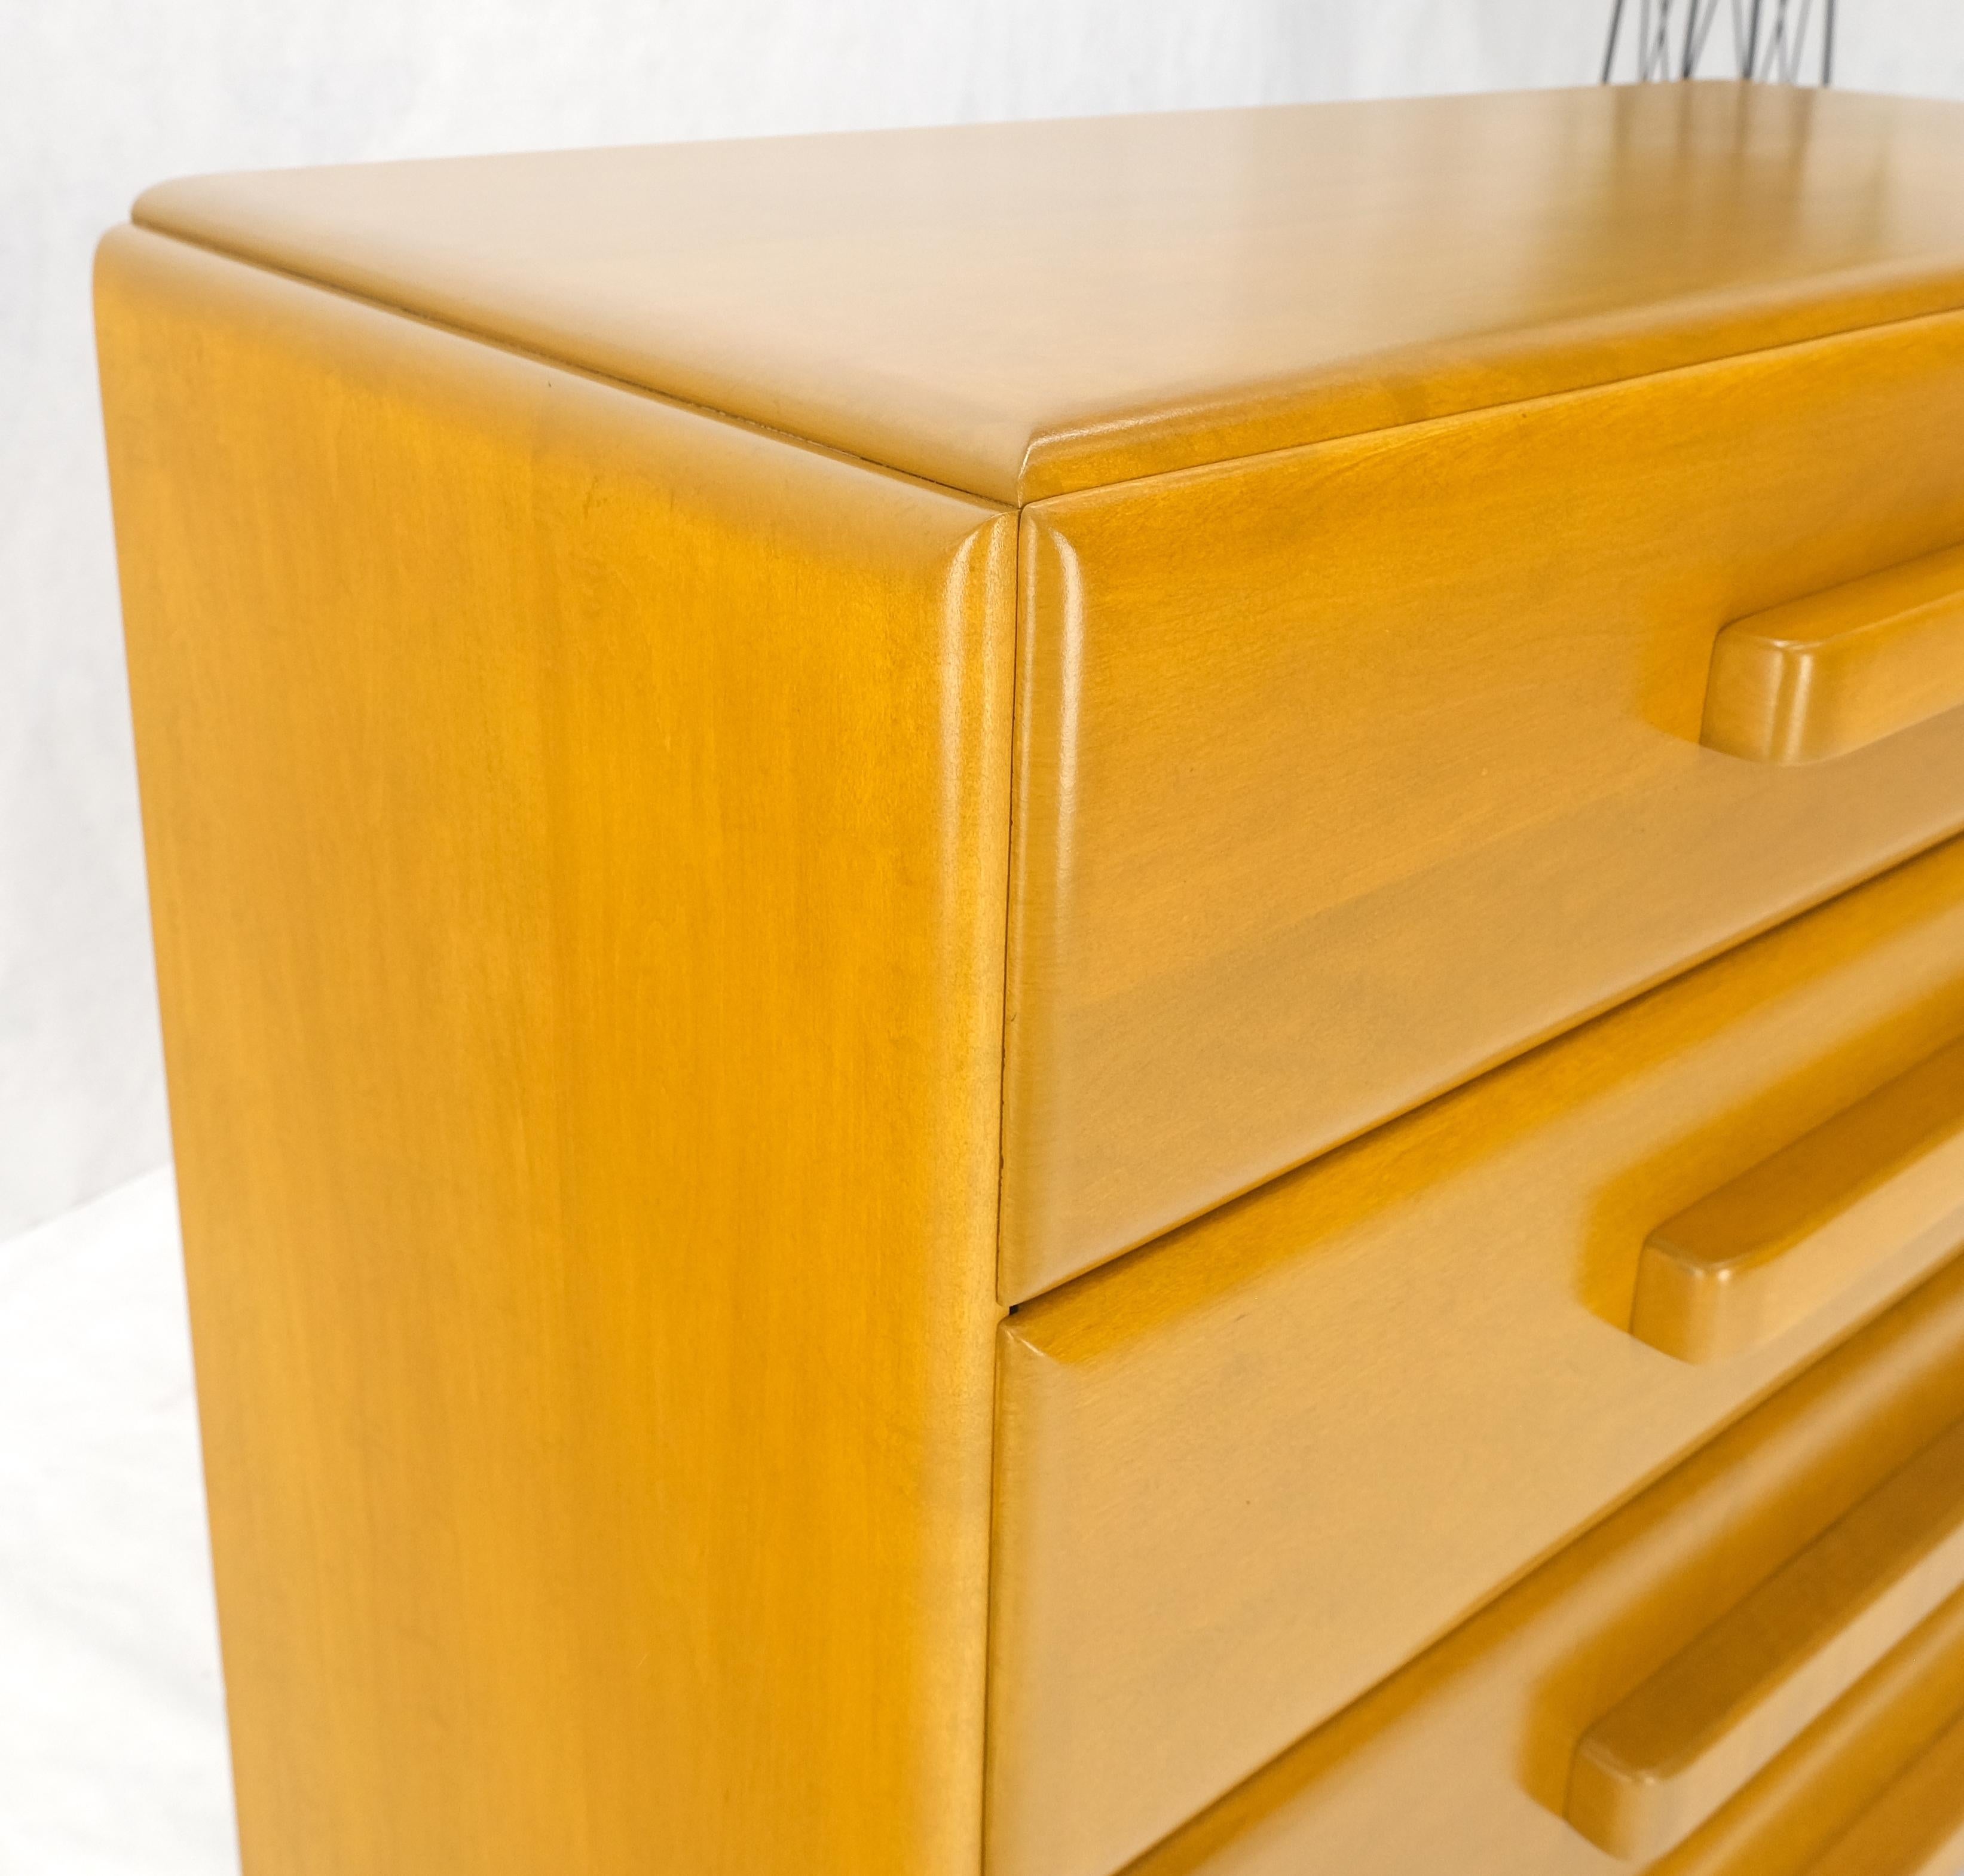 1960s Solid Maple Restored Russel Right Conant Ball Solid Maple 4 Drawer Dresser Bachelor Chest MINT!